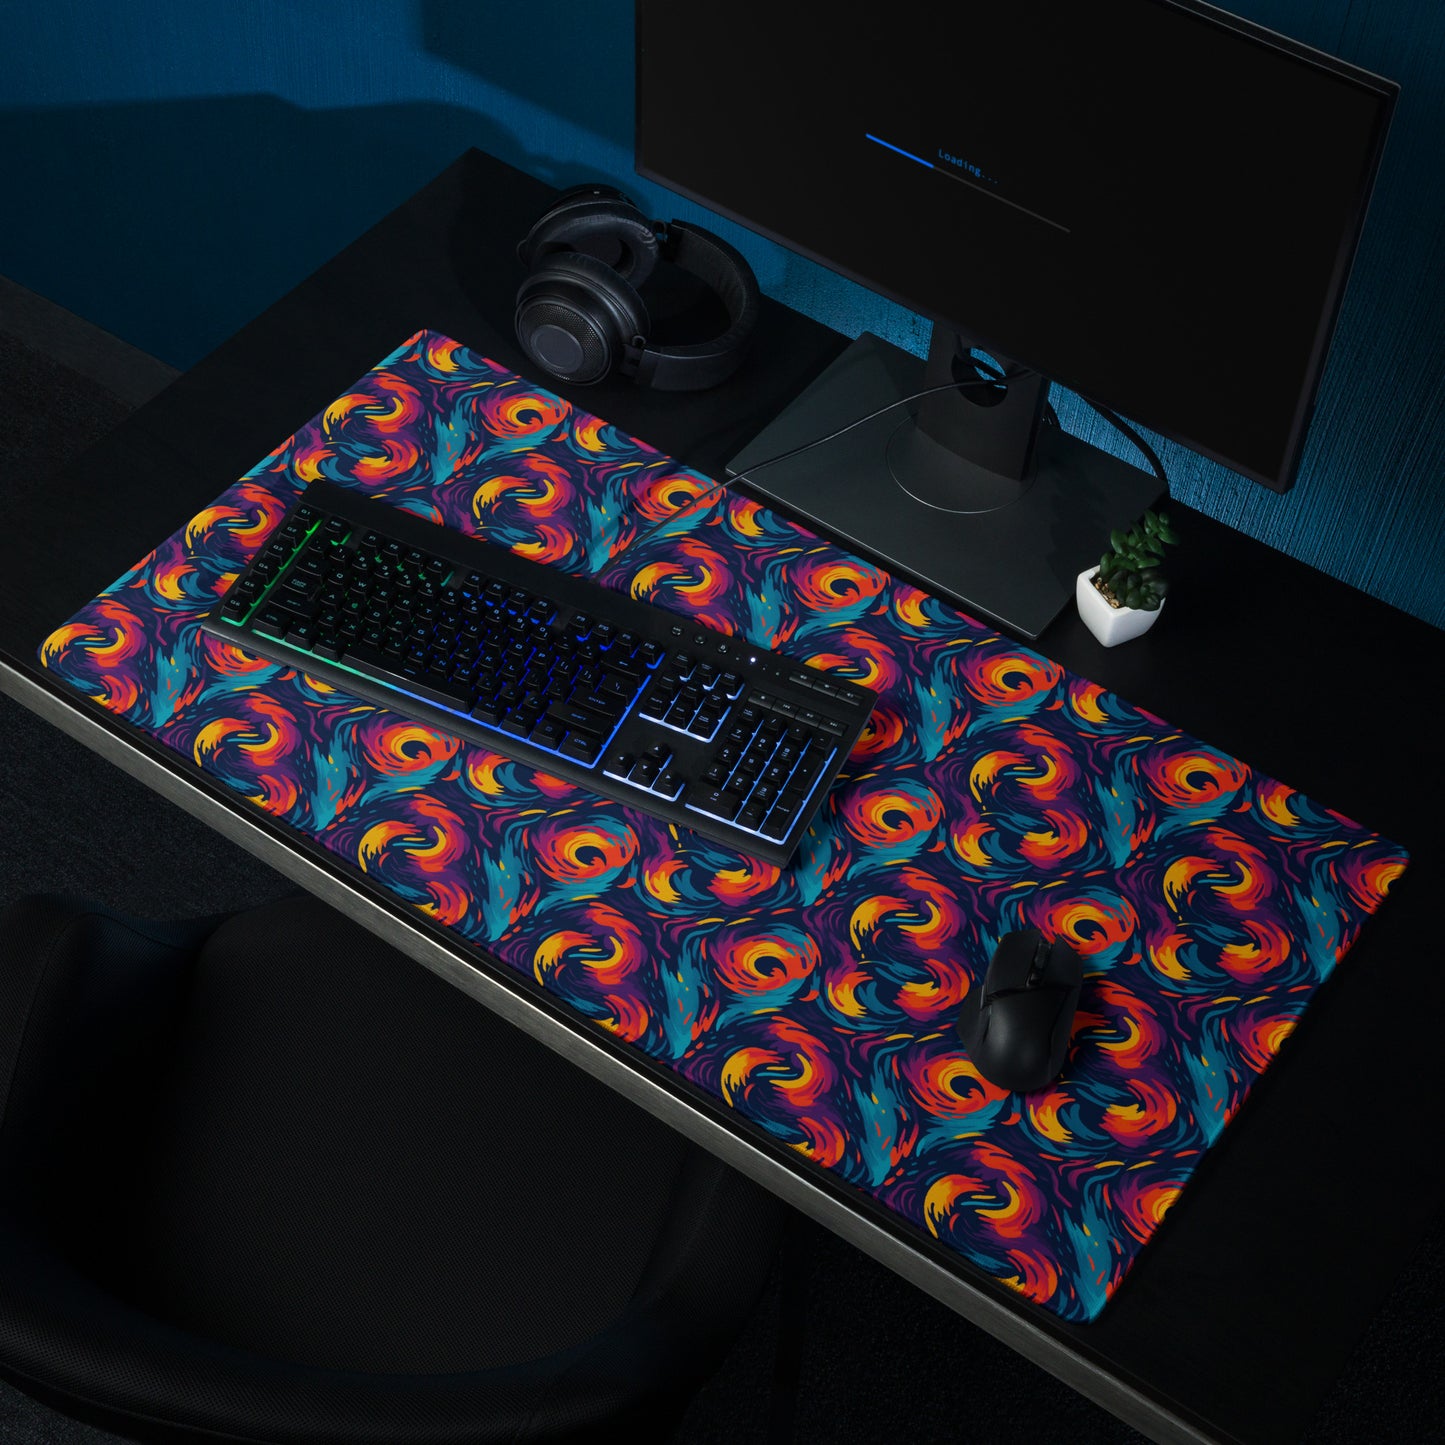 A 36" x 18" desk pad with fiery swirls on it shown on a desk setup. Red and Blue in color.